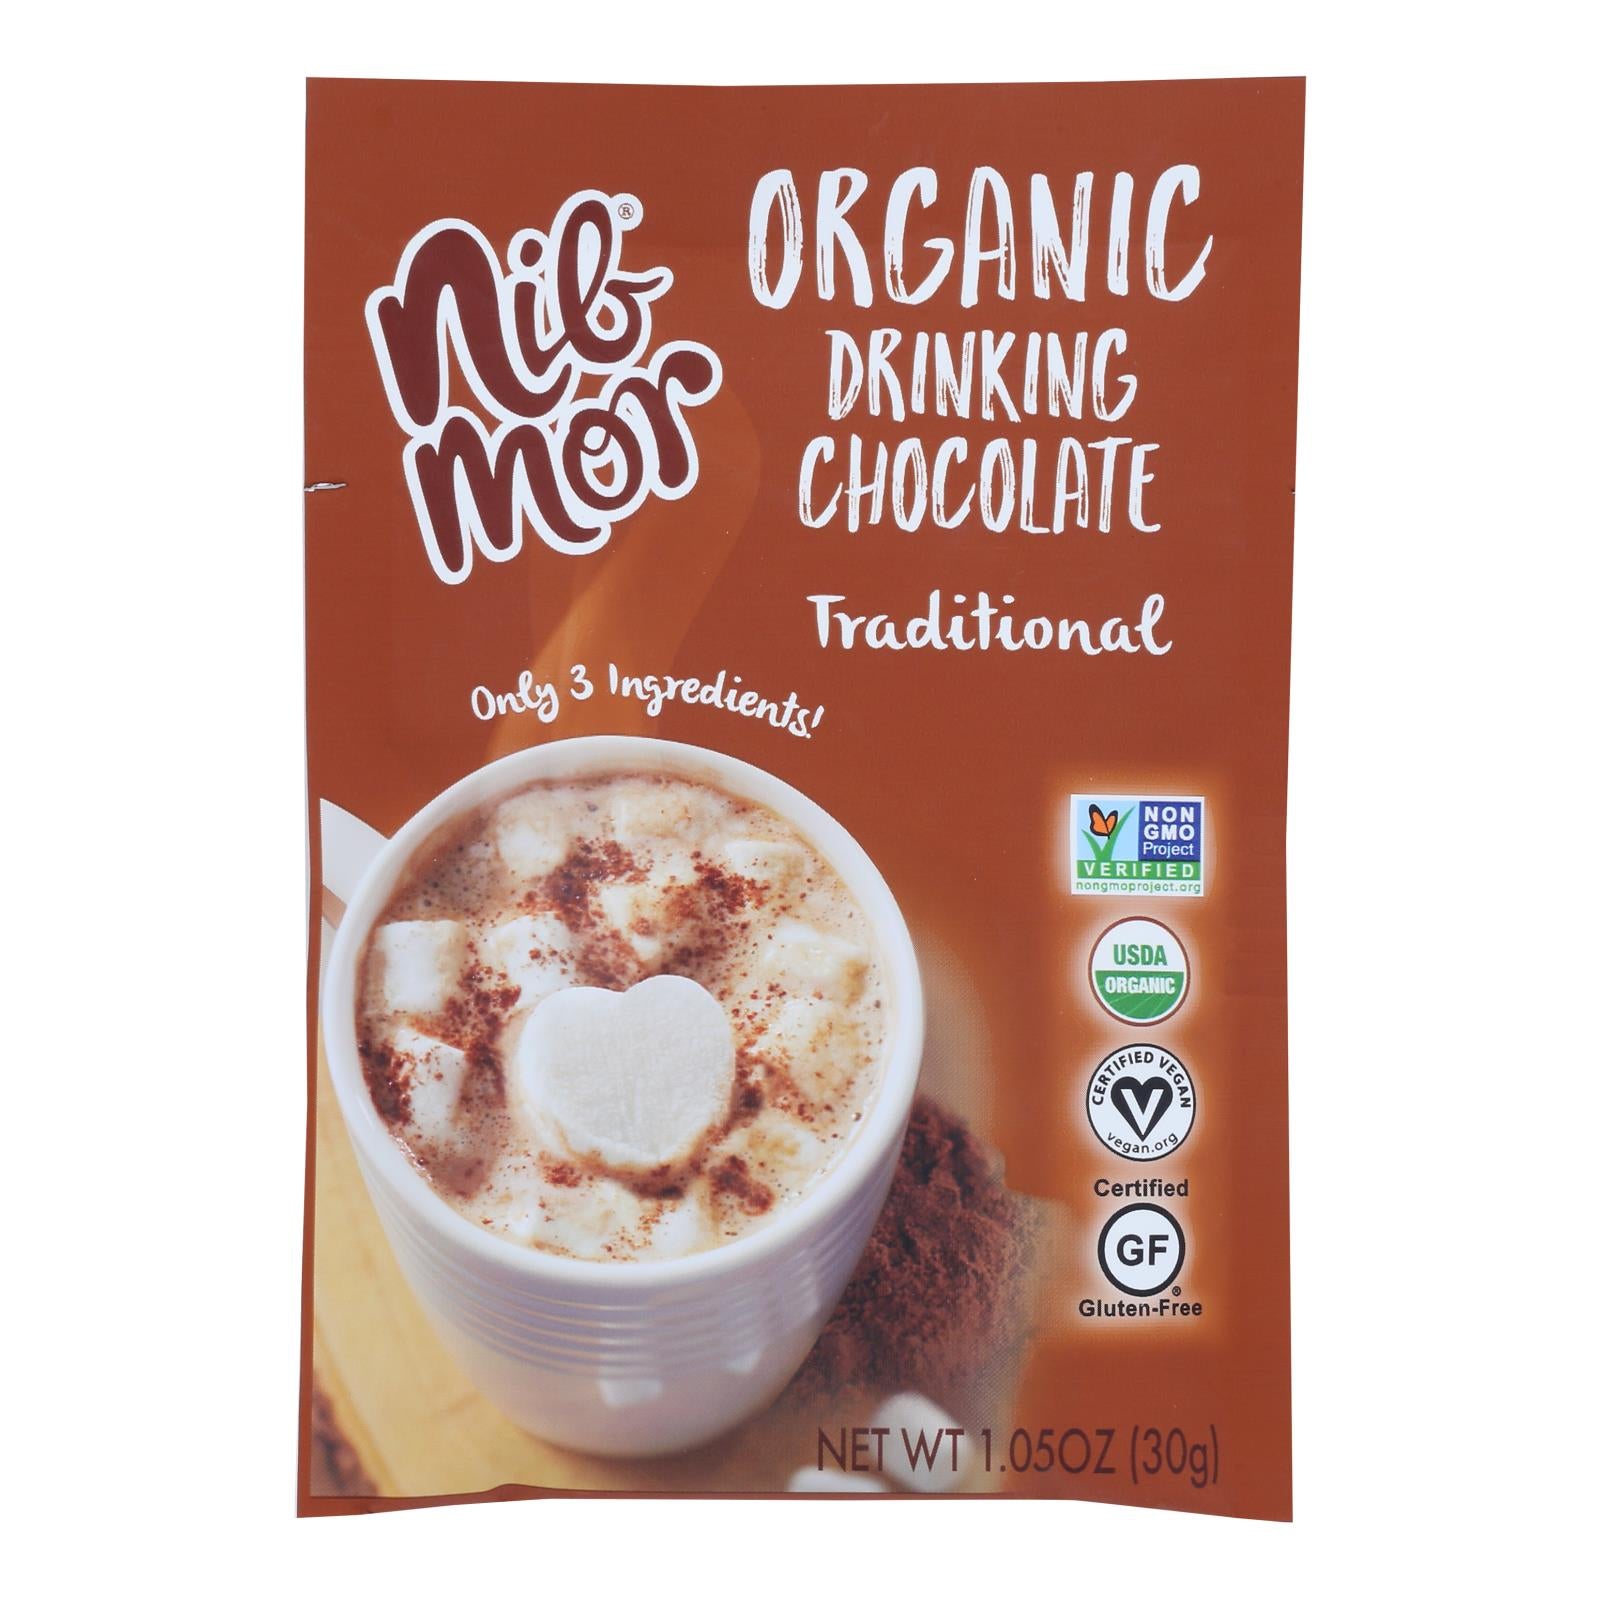 Nibmor Organic Drinking Chocolate Mix - Traditional - 1.05 Oz - Case Of 6 - Whole Green Foods